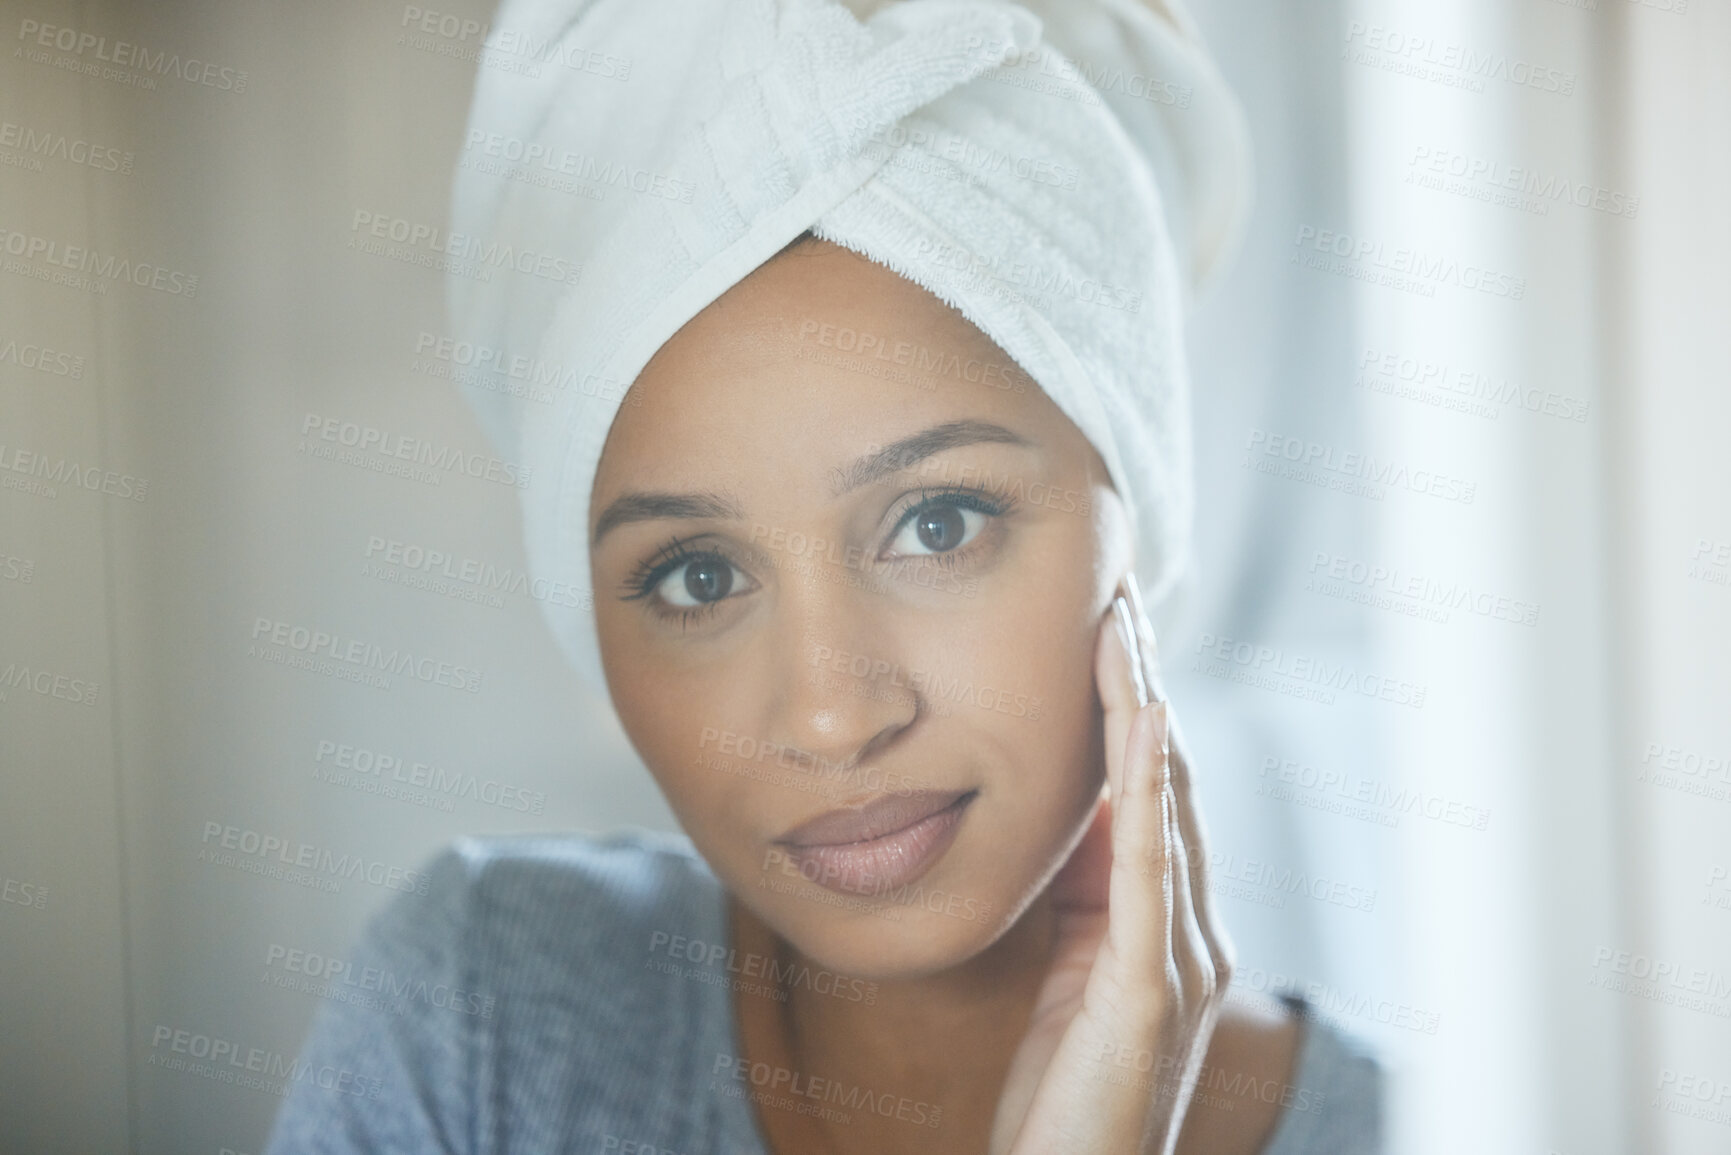 Buy stock photo Shot of a young woman getting ready in a bathroom at home